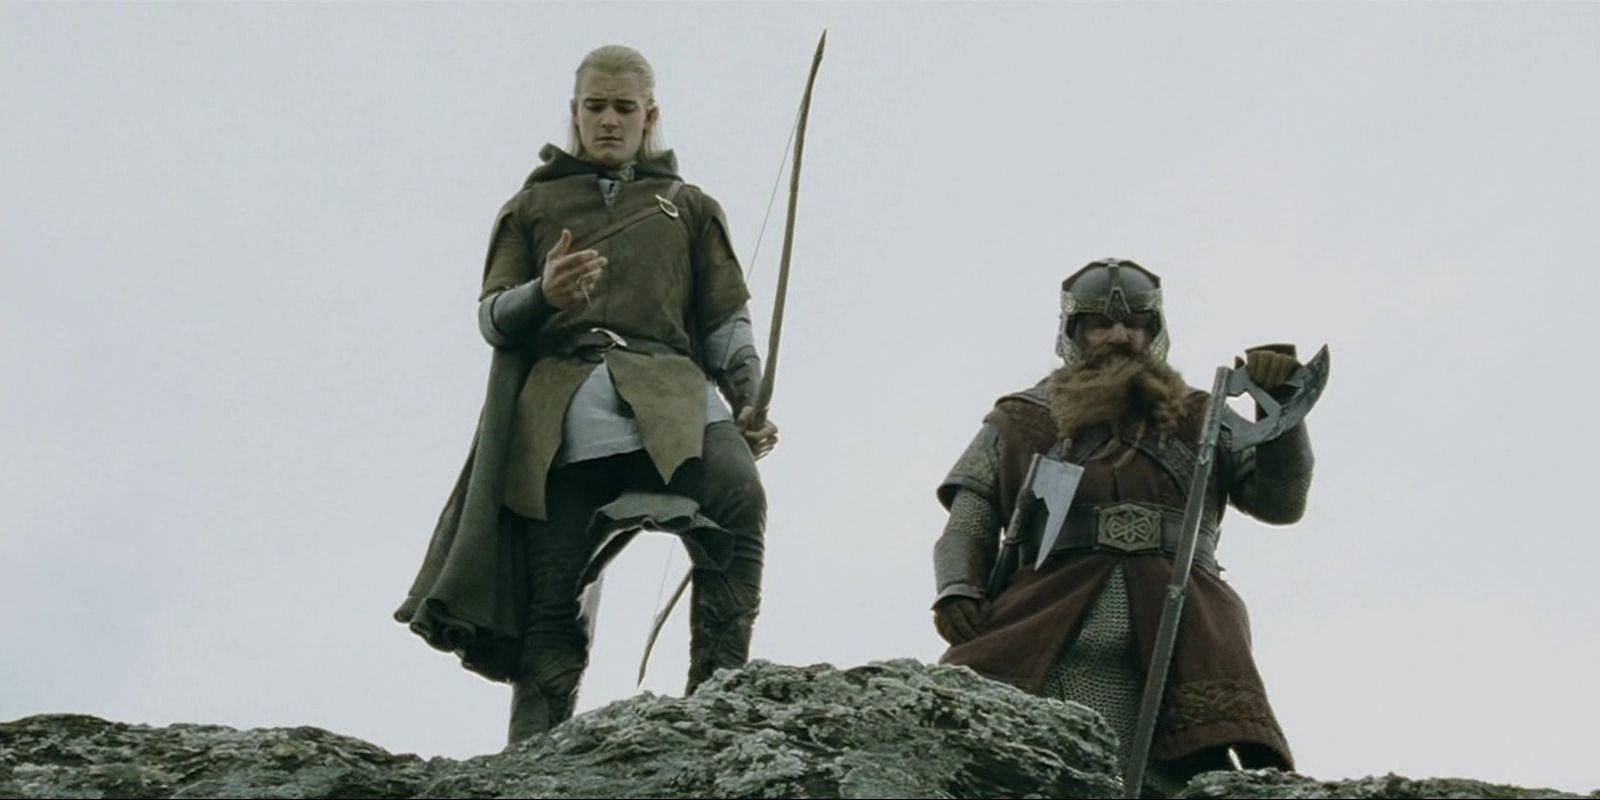 Legolas and Gimli from Lord of the Rings